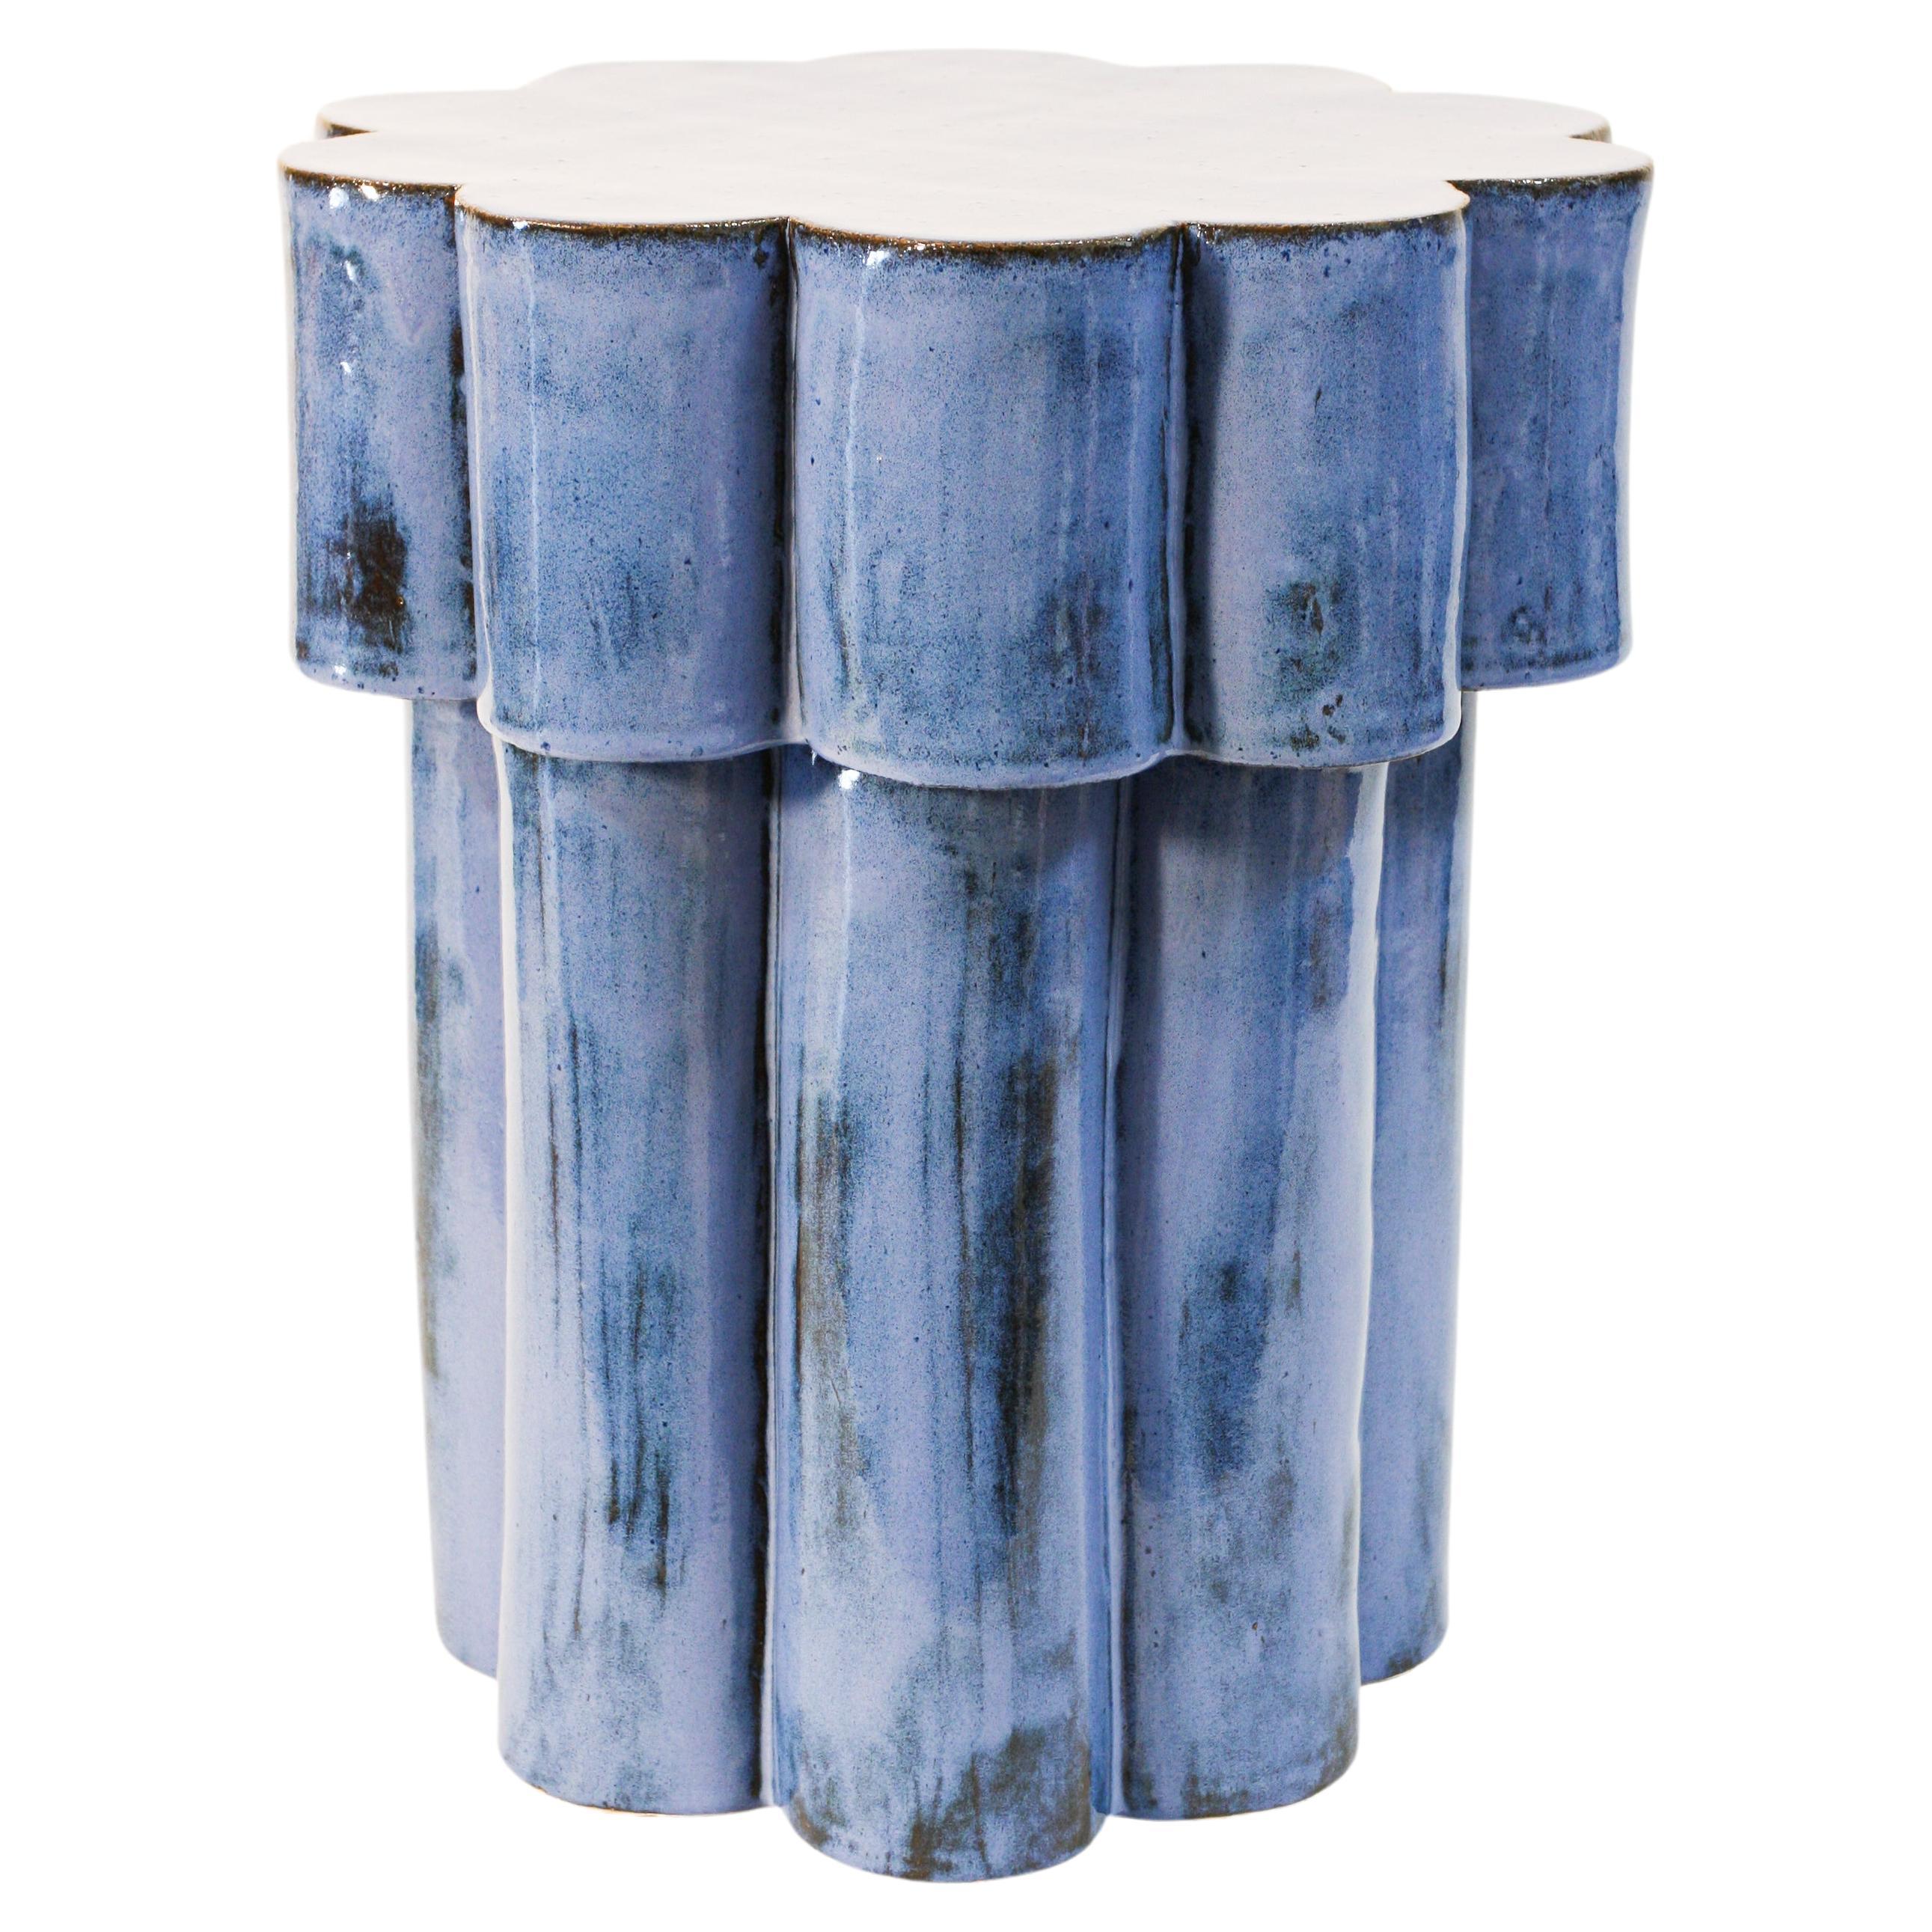 Two-Tier Ceramic Cloud Side Table & Stool in Mottled Blue by BZIPPY For Sale